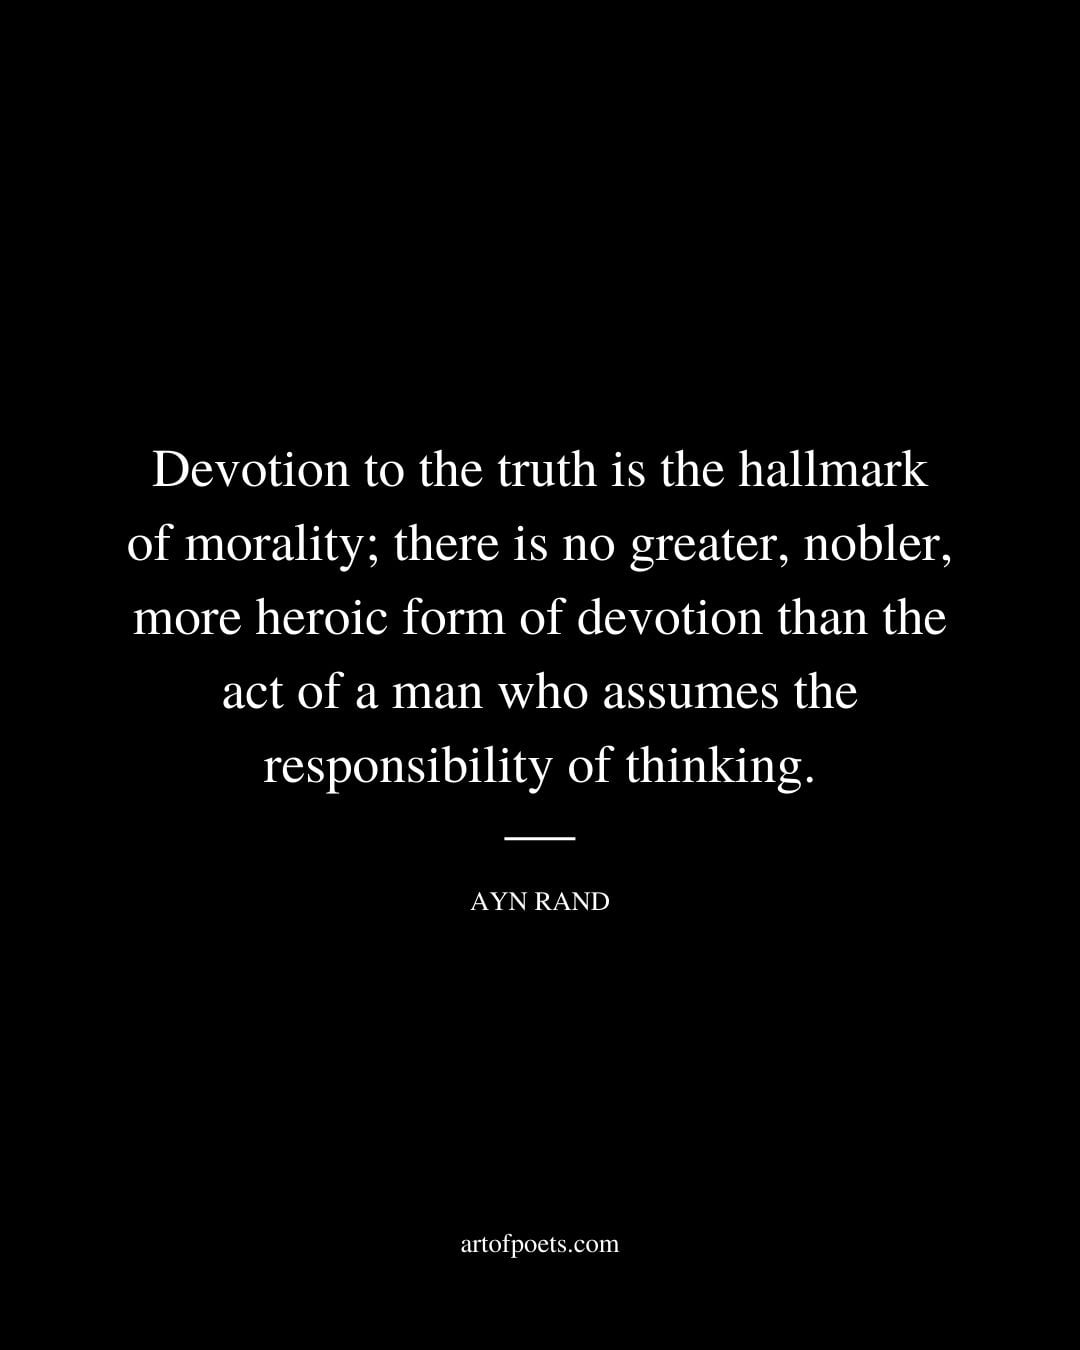 Devotion to the truth is the hallmark of morality there is no greater nobler more heroic form of devotion than the act of a man who assumes the responsibility of thinking